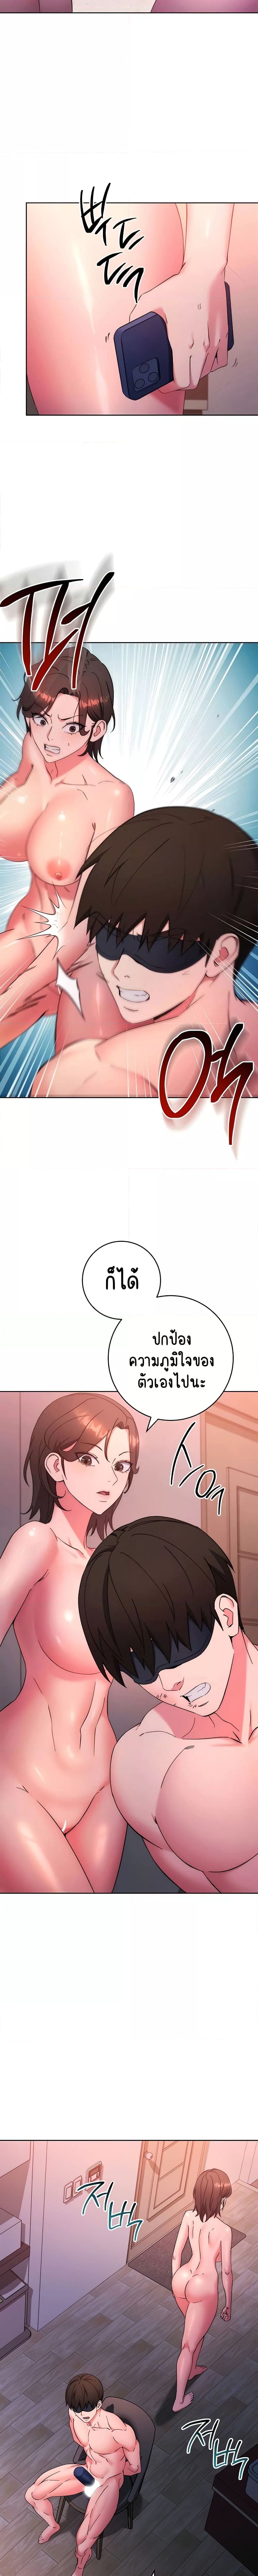 Outsider: The Invisible Man ตอนที่ 9 ภาพ 4